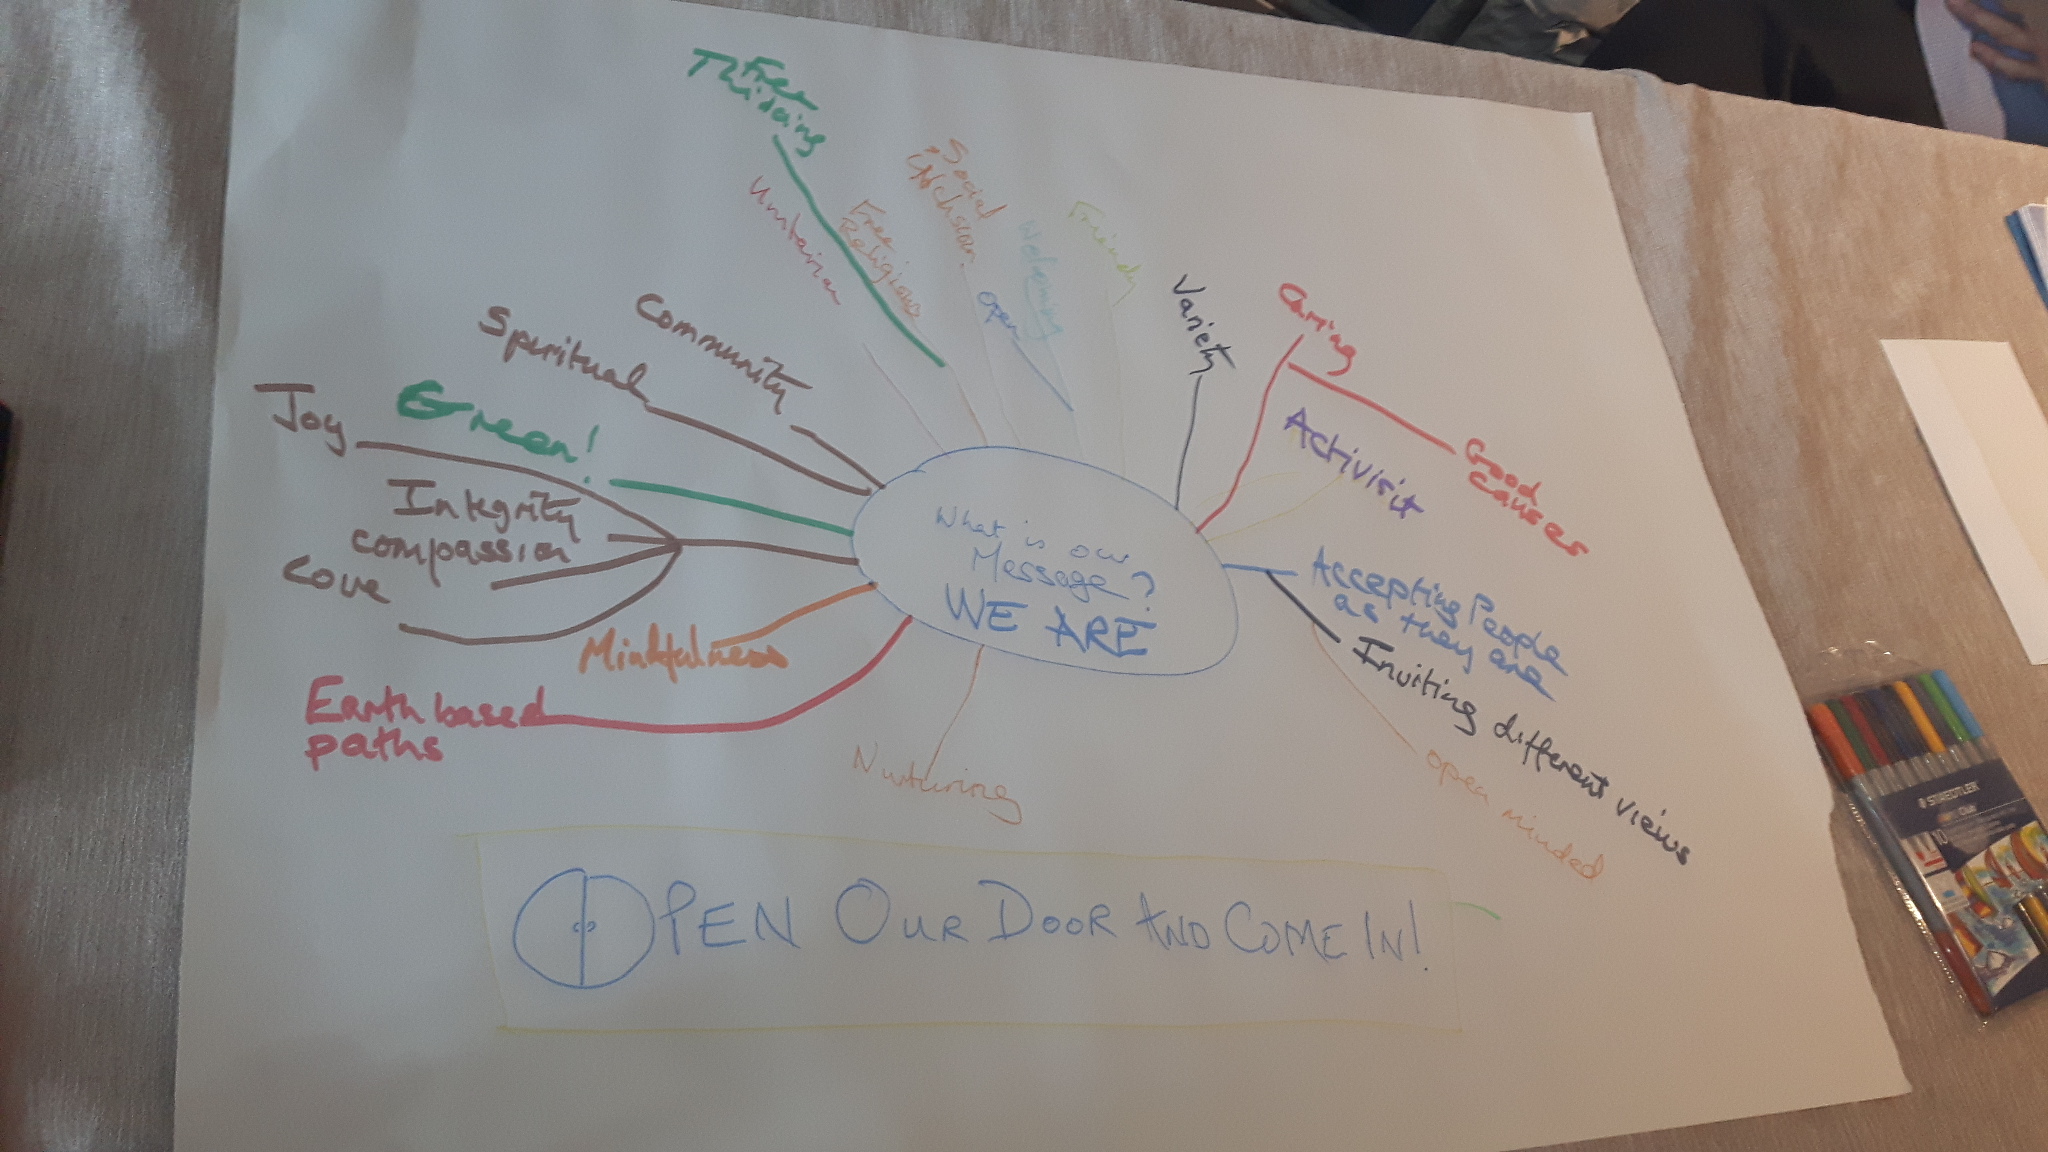 Photo: Our mind map and tag line